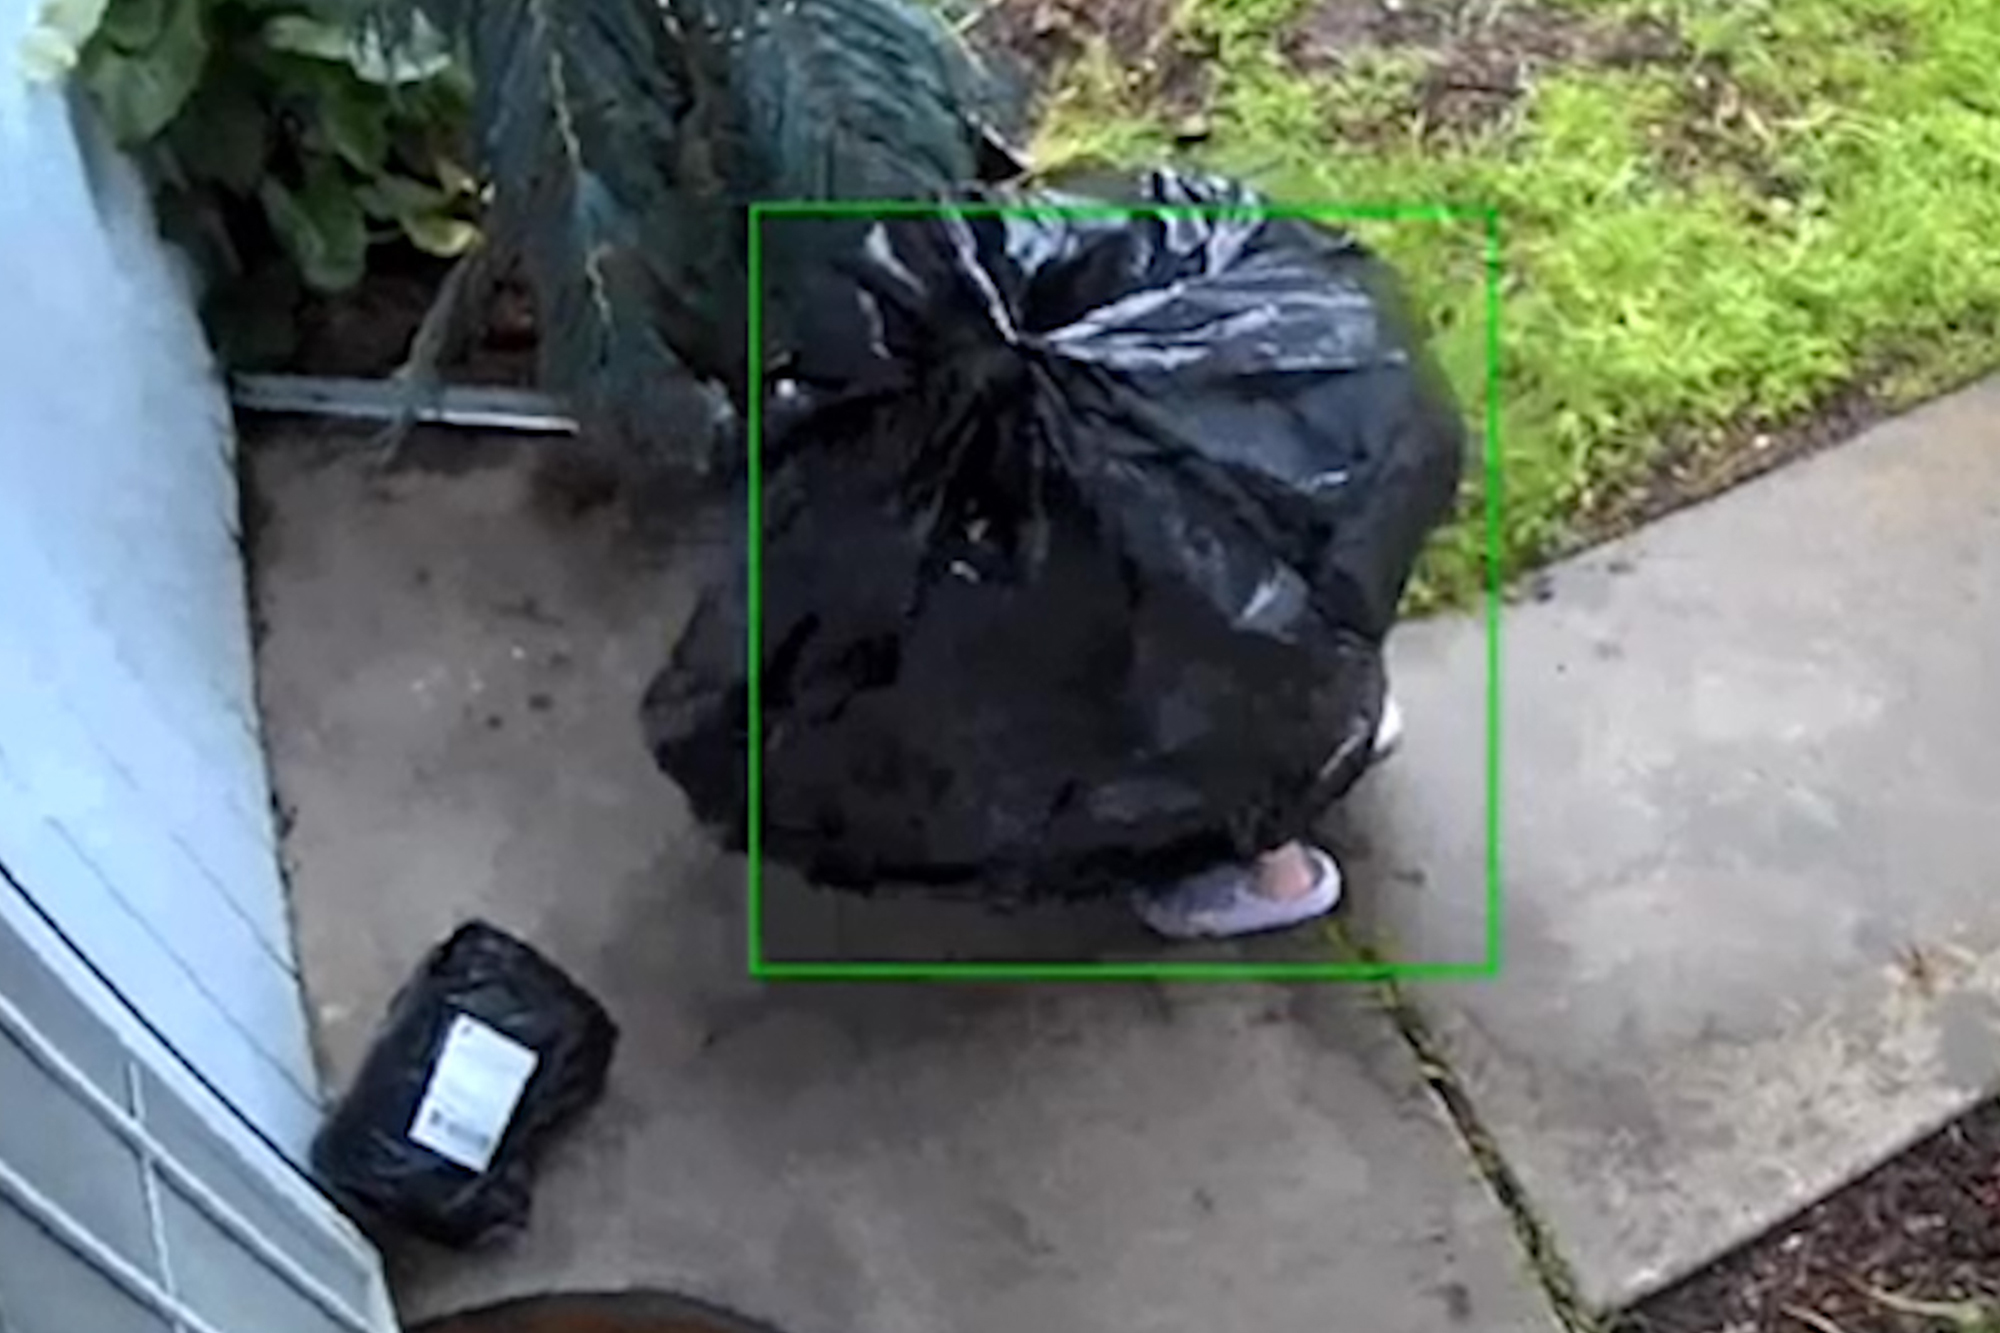 Porch pirate disguised as trash bag caught on video stealing packages from home